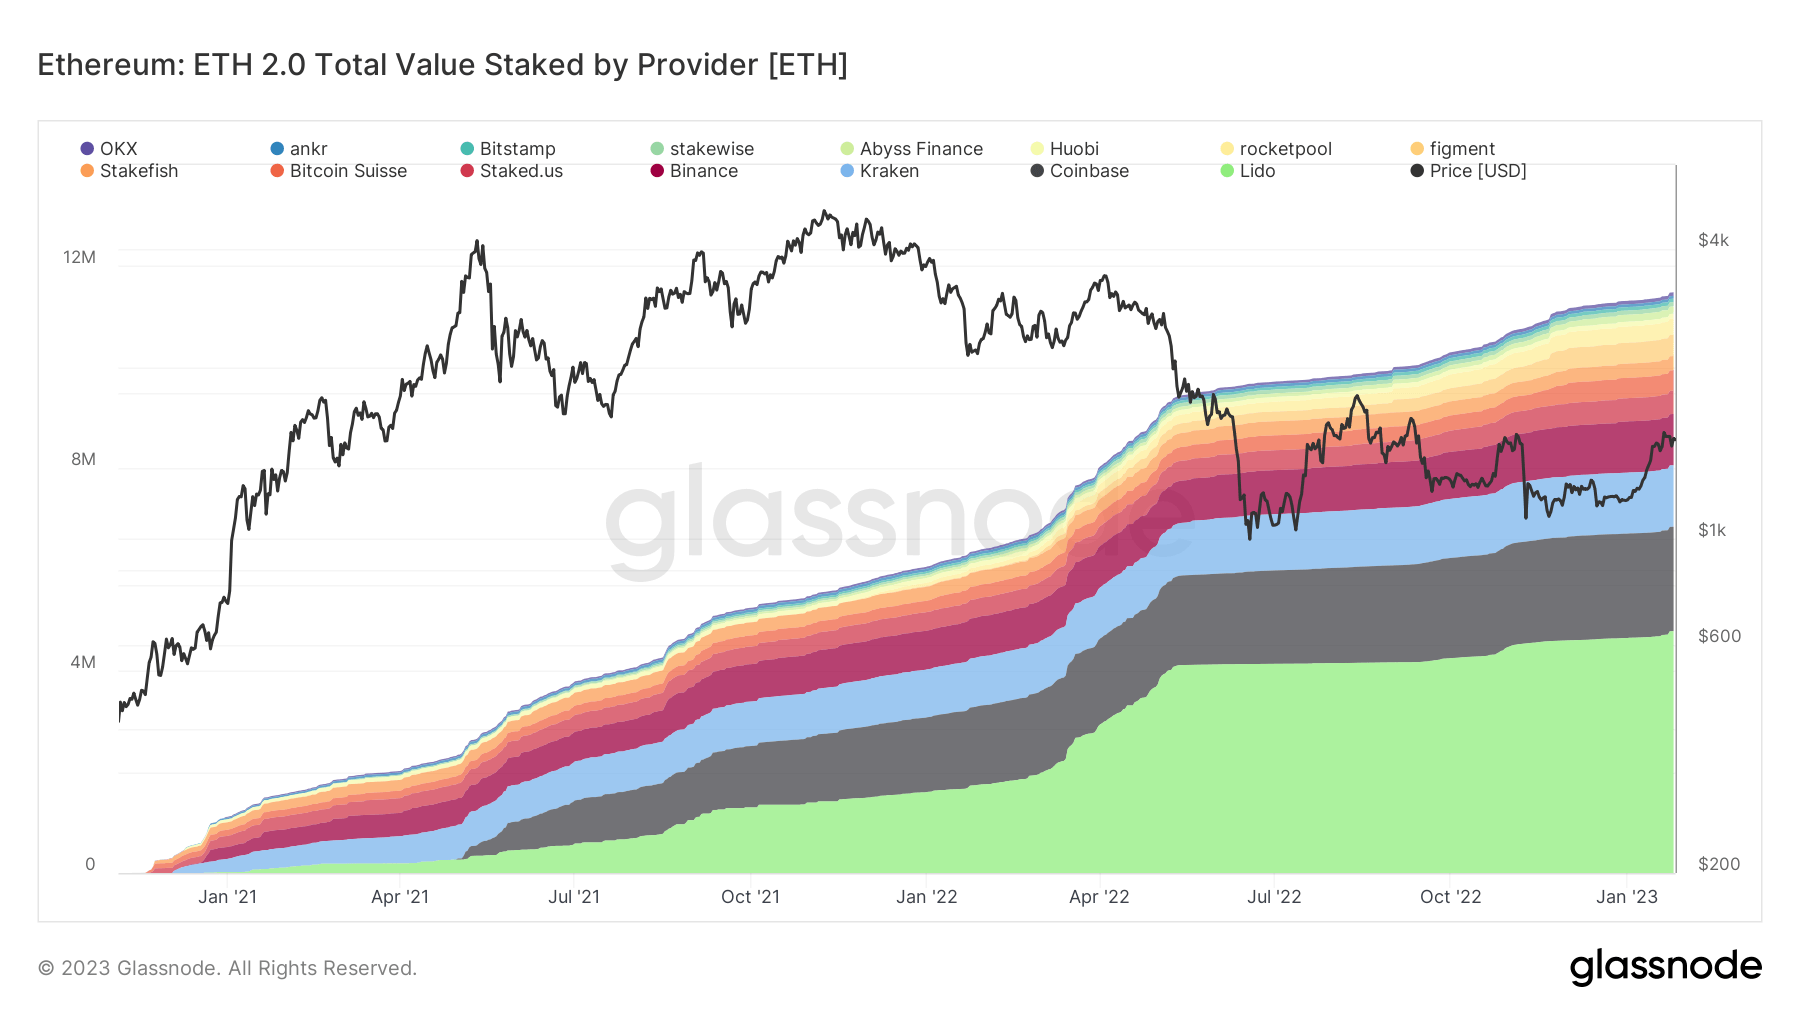 Total value staked by provider: (Source: Glassnode)